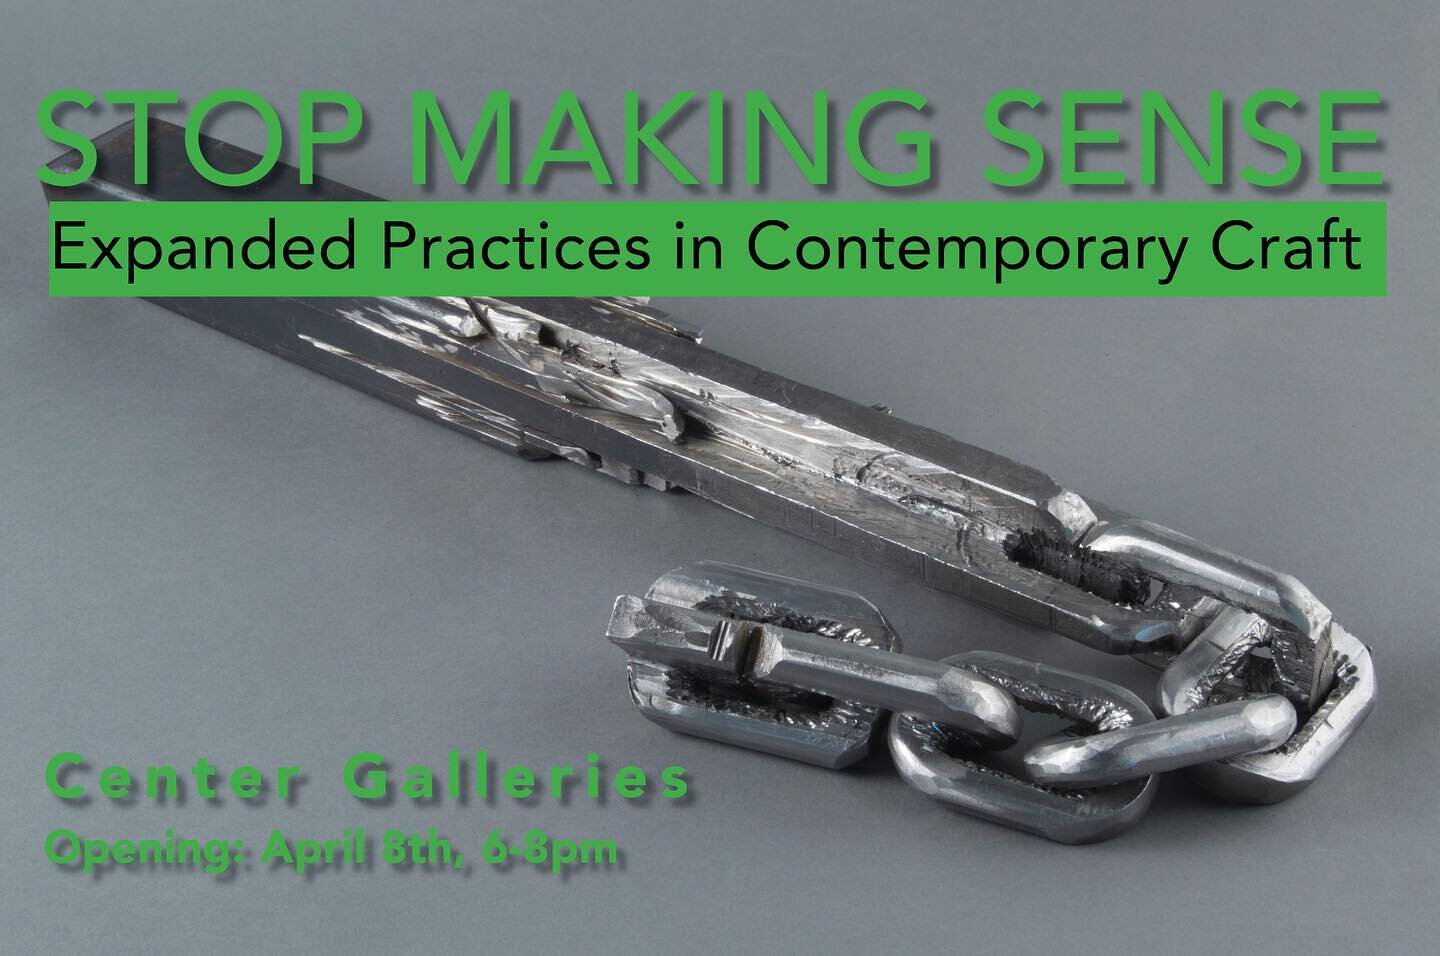 Stop Making Sense: Expanded Practices in Contemporary Craft gathers outstanding examples of crafted objects created by artists in the Detroit and metro area. Organized by Kim Harty, Chair of Craft &amp; Material Studies at the College for Creative St